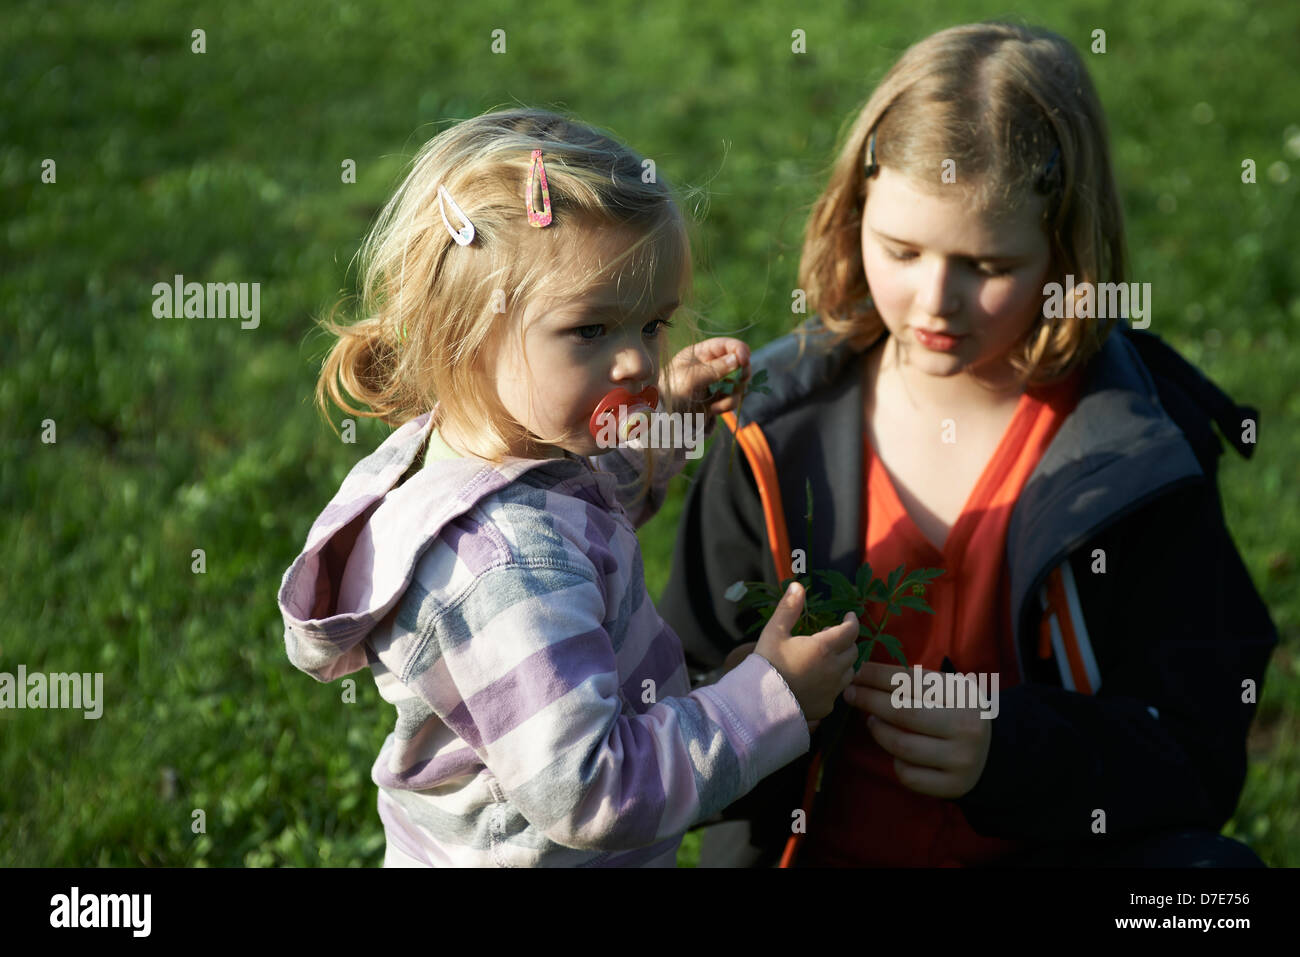 Two children blond girls playing with grass garden and flowers summer time Stock Photo